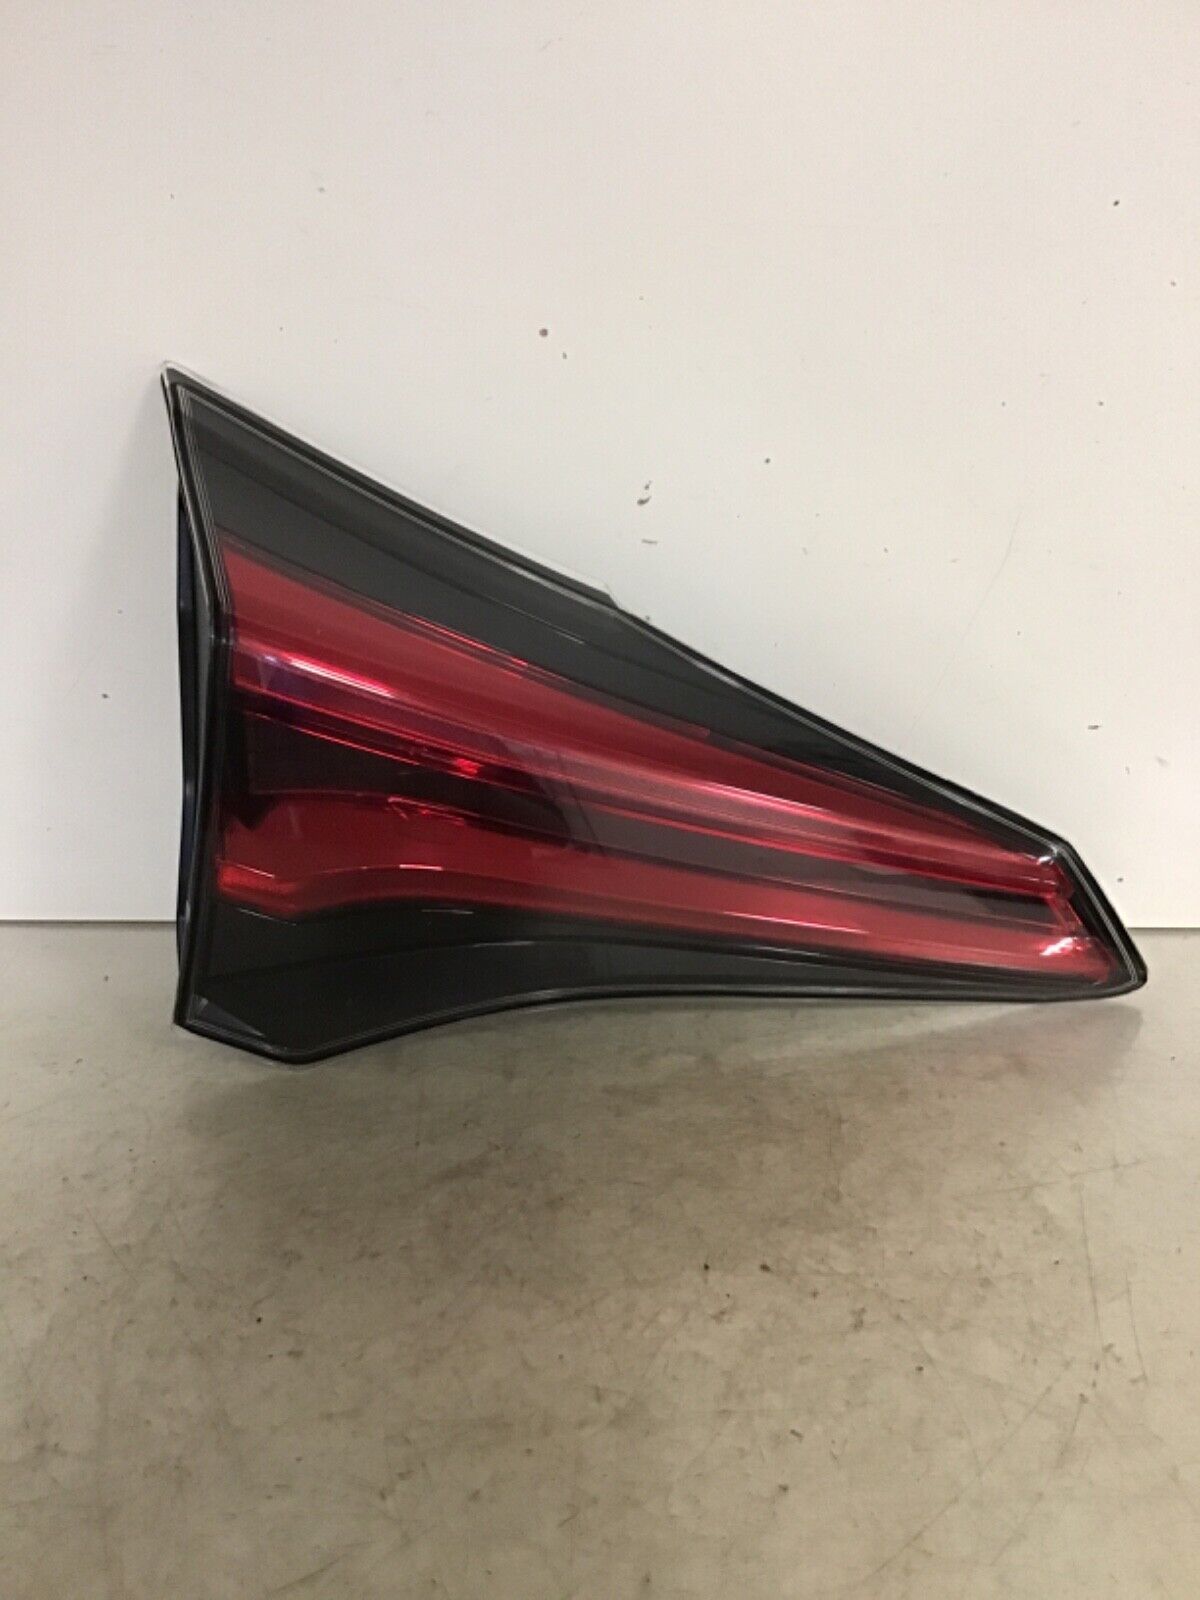 Primary image for FITS 2016 2017 2018 TOYOTA RAV4 LH DRIVER LID MOUNT TAIL LIGHT TYC C85L 12490